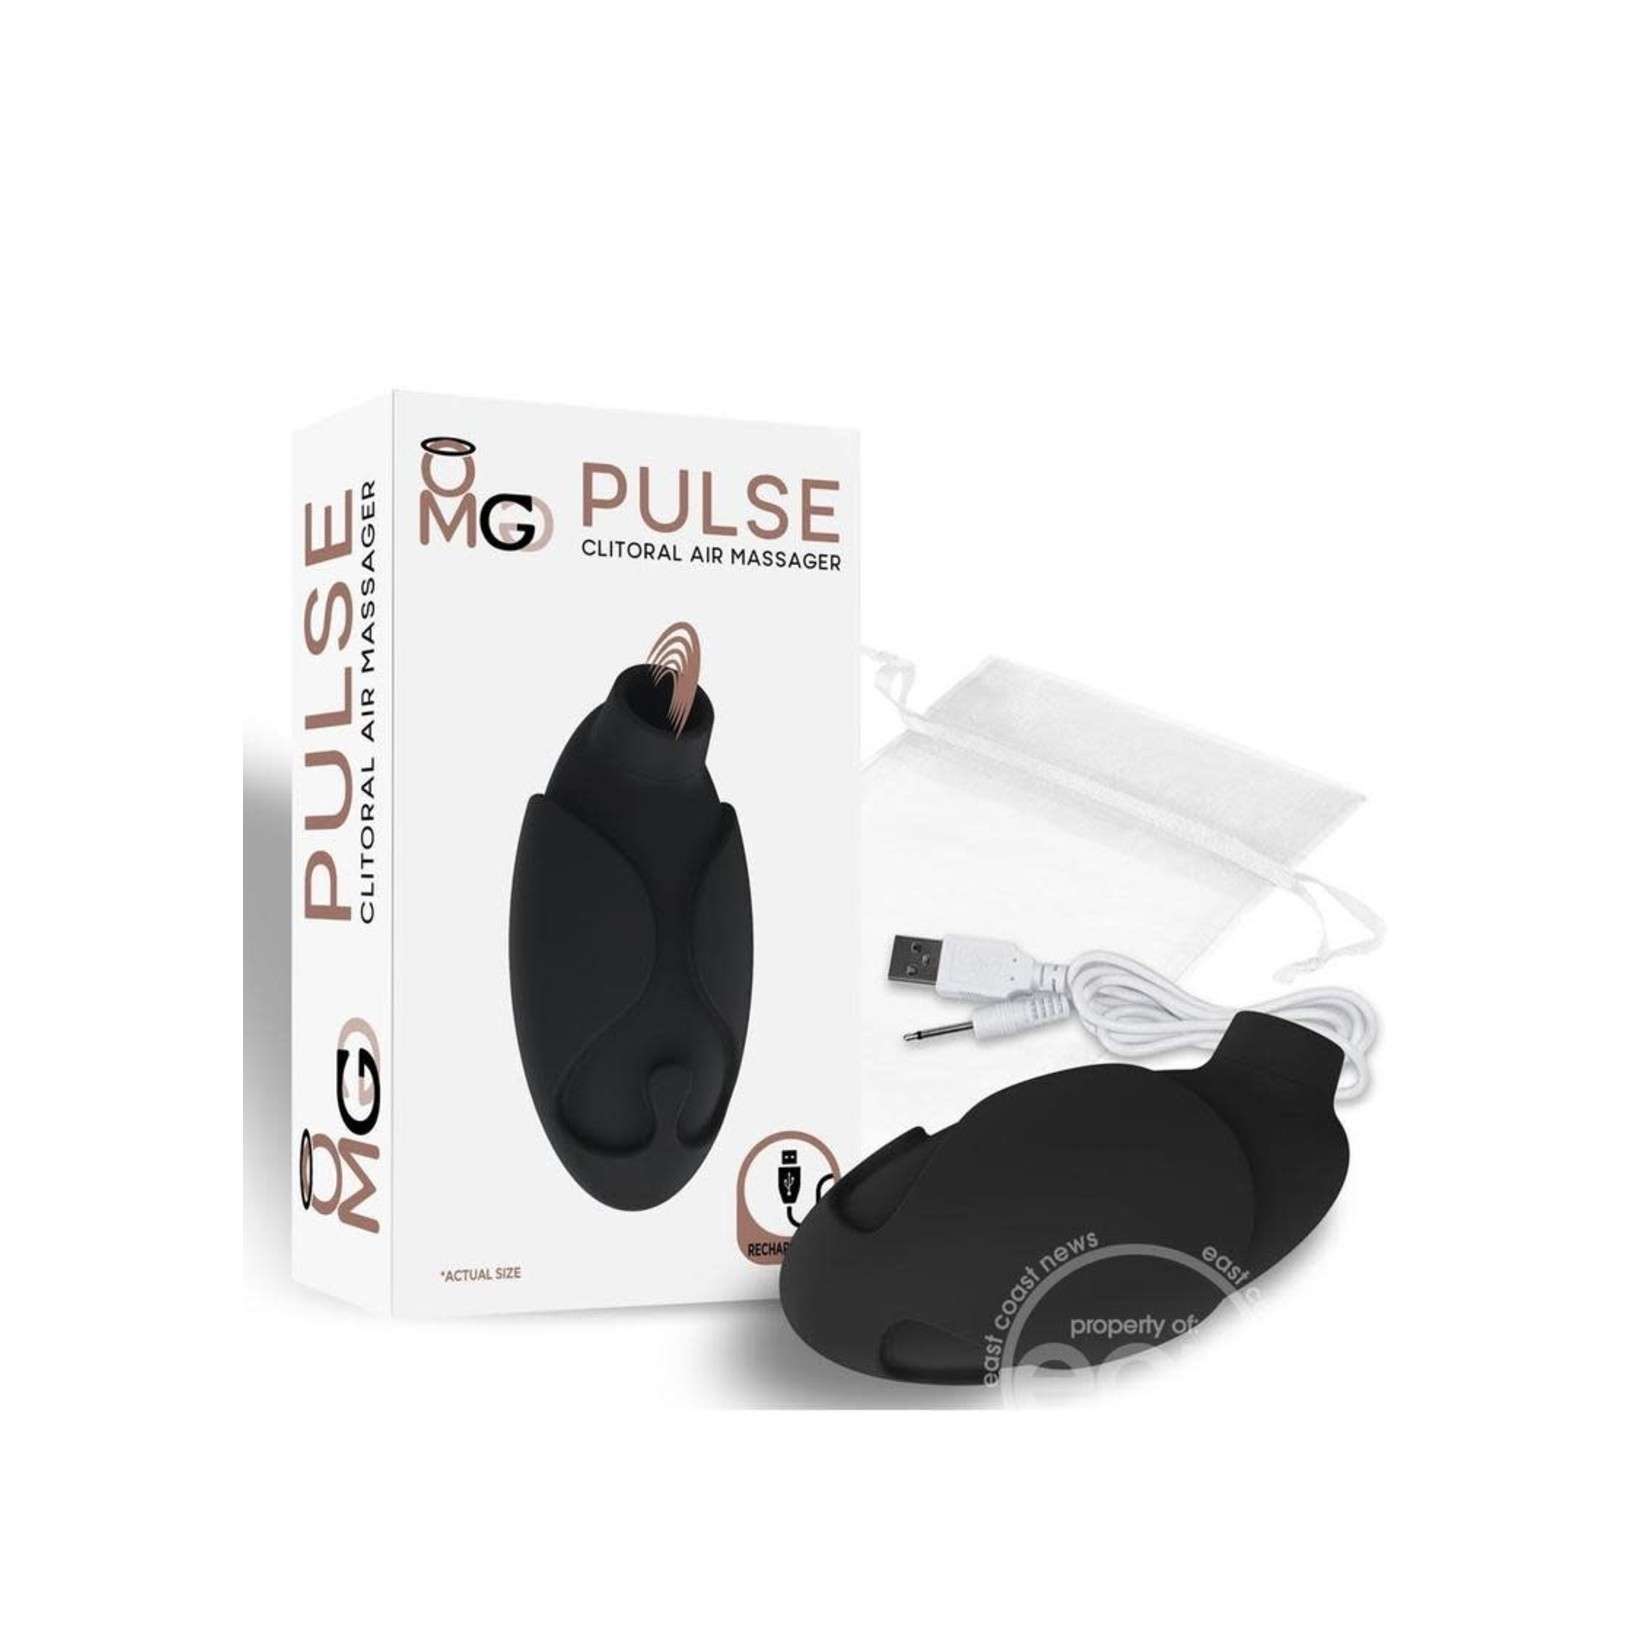 OMG Pulse Rechargeable Silicone Clitoral Air Massager - Black